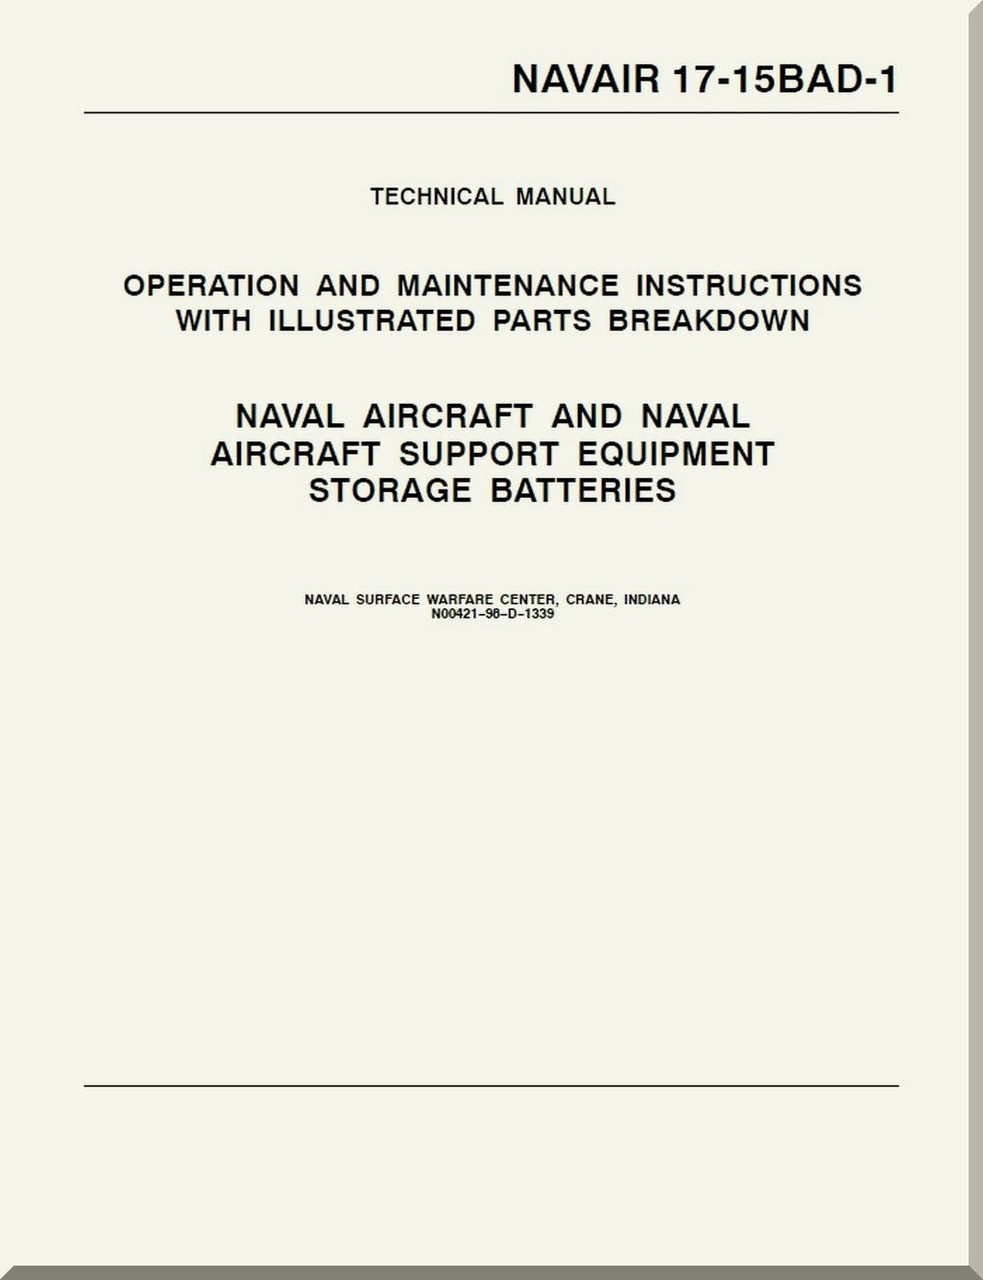 Technical Manual - Operation and Service Instructions with Illustrated